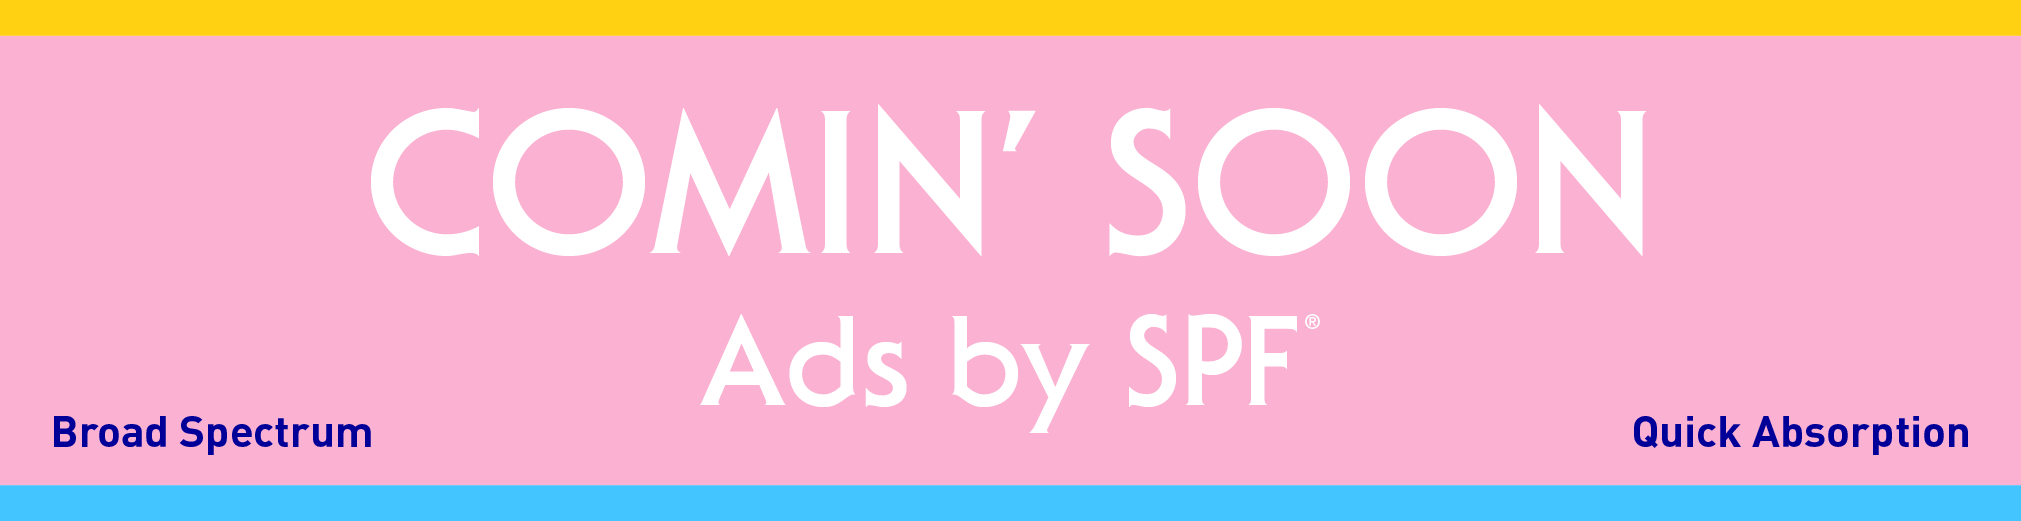 Ads by SPF Comin' Soon